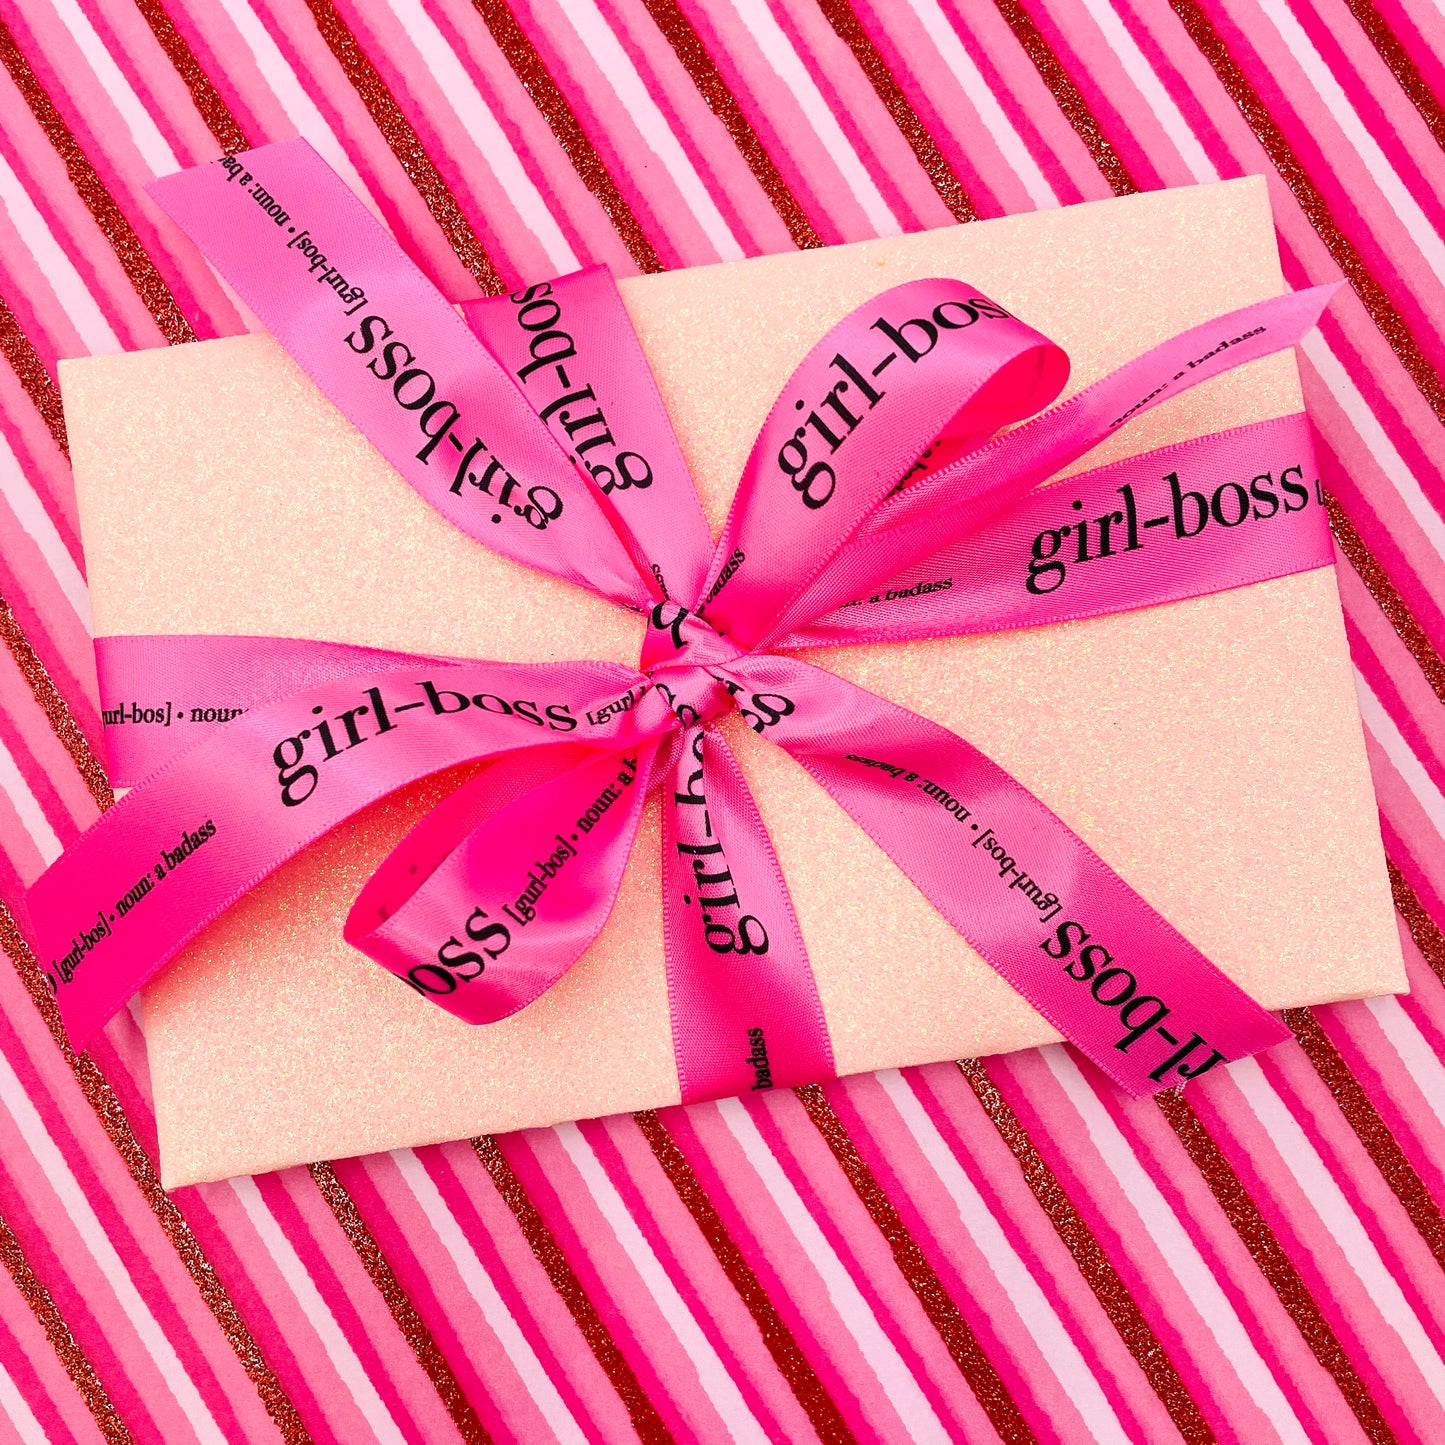 Tie a pretty bow on a light pink packages for a fun gift for your girl boss or the girl boss to be! 